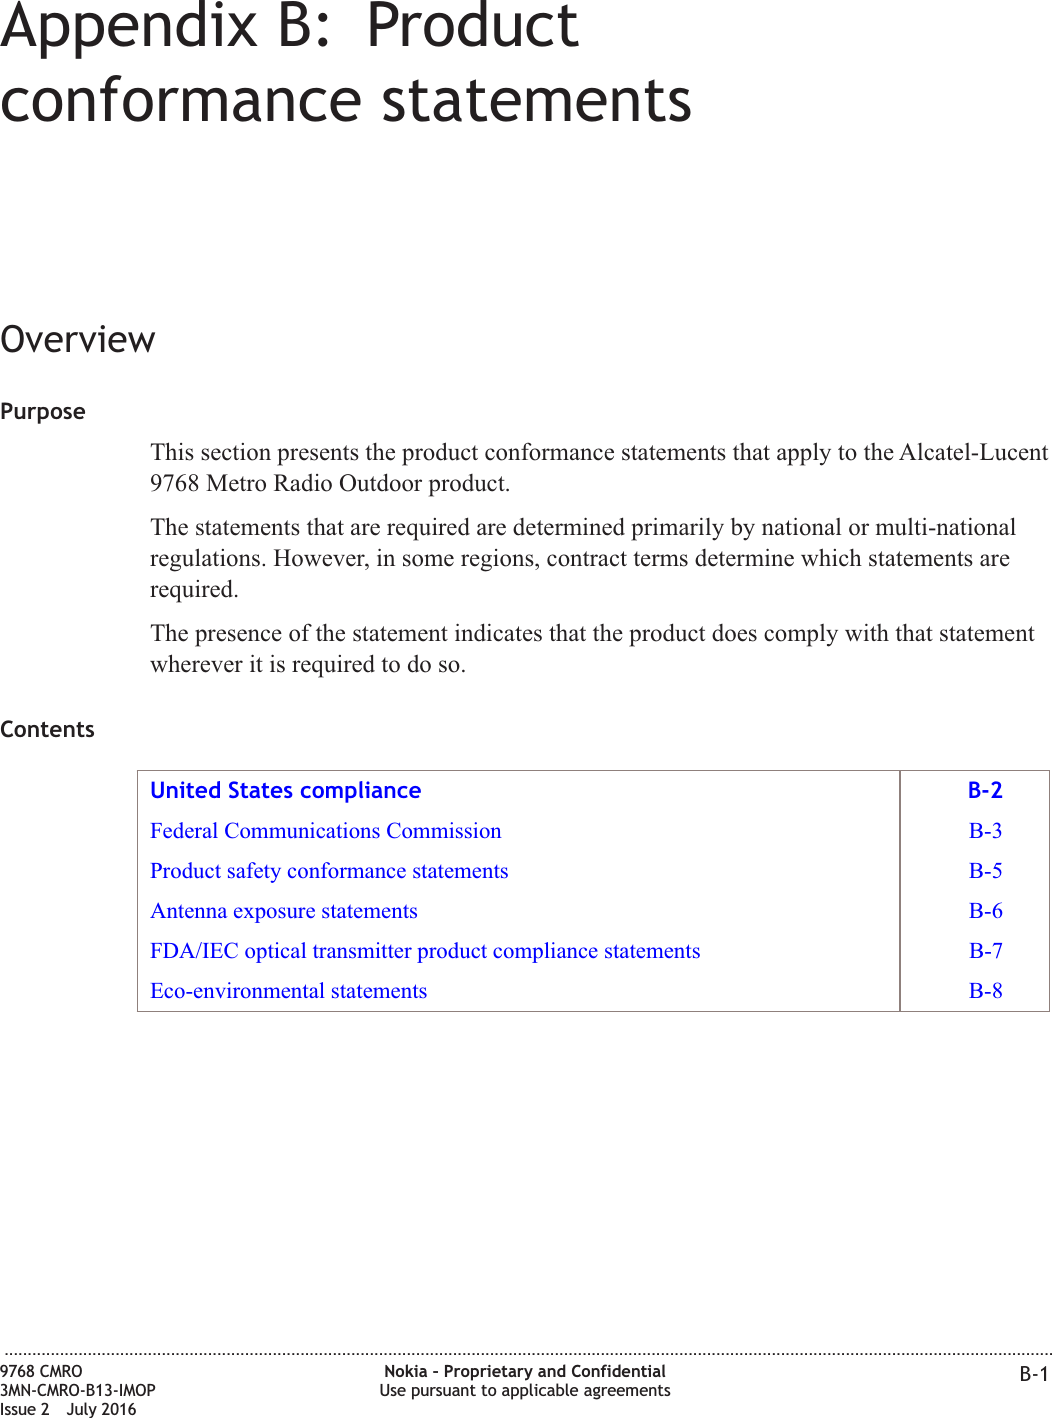 Appendix B: Productconformance statementsOverviewPurposeThis section presents the product conformance statements that apply to the Alcatel-Lucent9768 Metro Radio Outdoor product.The statements that are required are determined primarily by national or multi-nationalregulations. However, in some regions, contract terms determine which statements arerequired.The presence of the statement indicates that the product does comply with that statementwherever it is required to do so.ContentsUnited States compliance B-2Federal Communications Commission B-3Product safety conformance statements B-5Antenna exposure statements B-6FDA/IEC optical transmitter product compliance statements B-7Eco-environmental statements B-8...................................................................................................................................................................................................................................9768 CMRO3MN-CMRO-B13-IMOPIssue 2 July 2016Nokia – Proprietary and ConfidentialUse pursuant to applicable agreements B-1FCC FILING FCC FILING